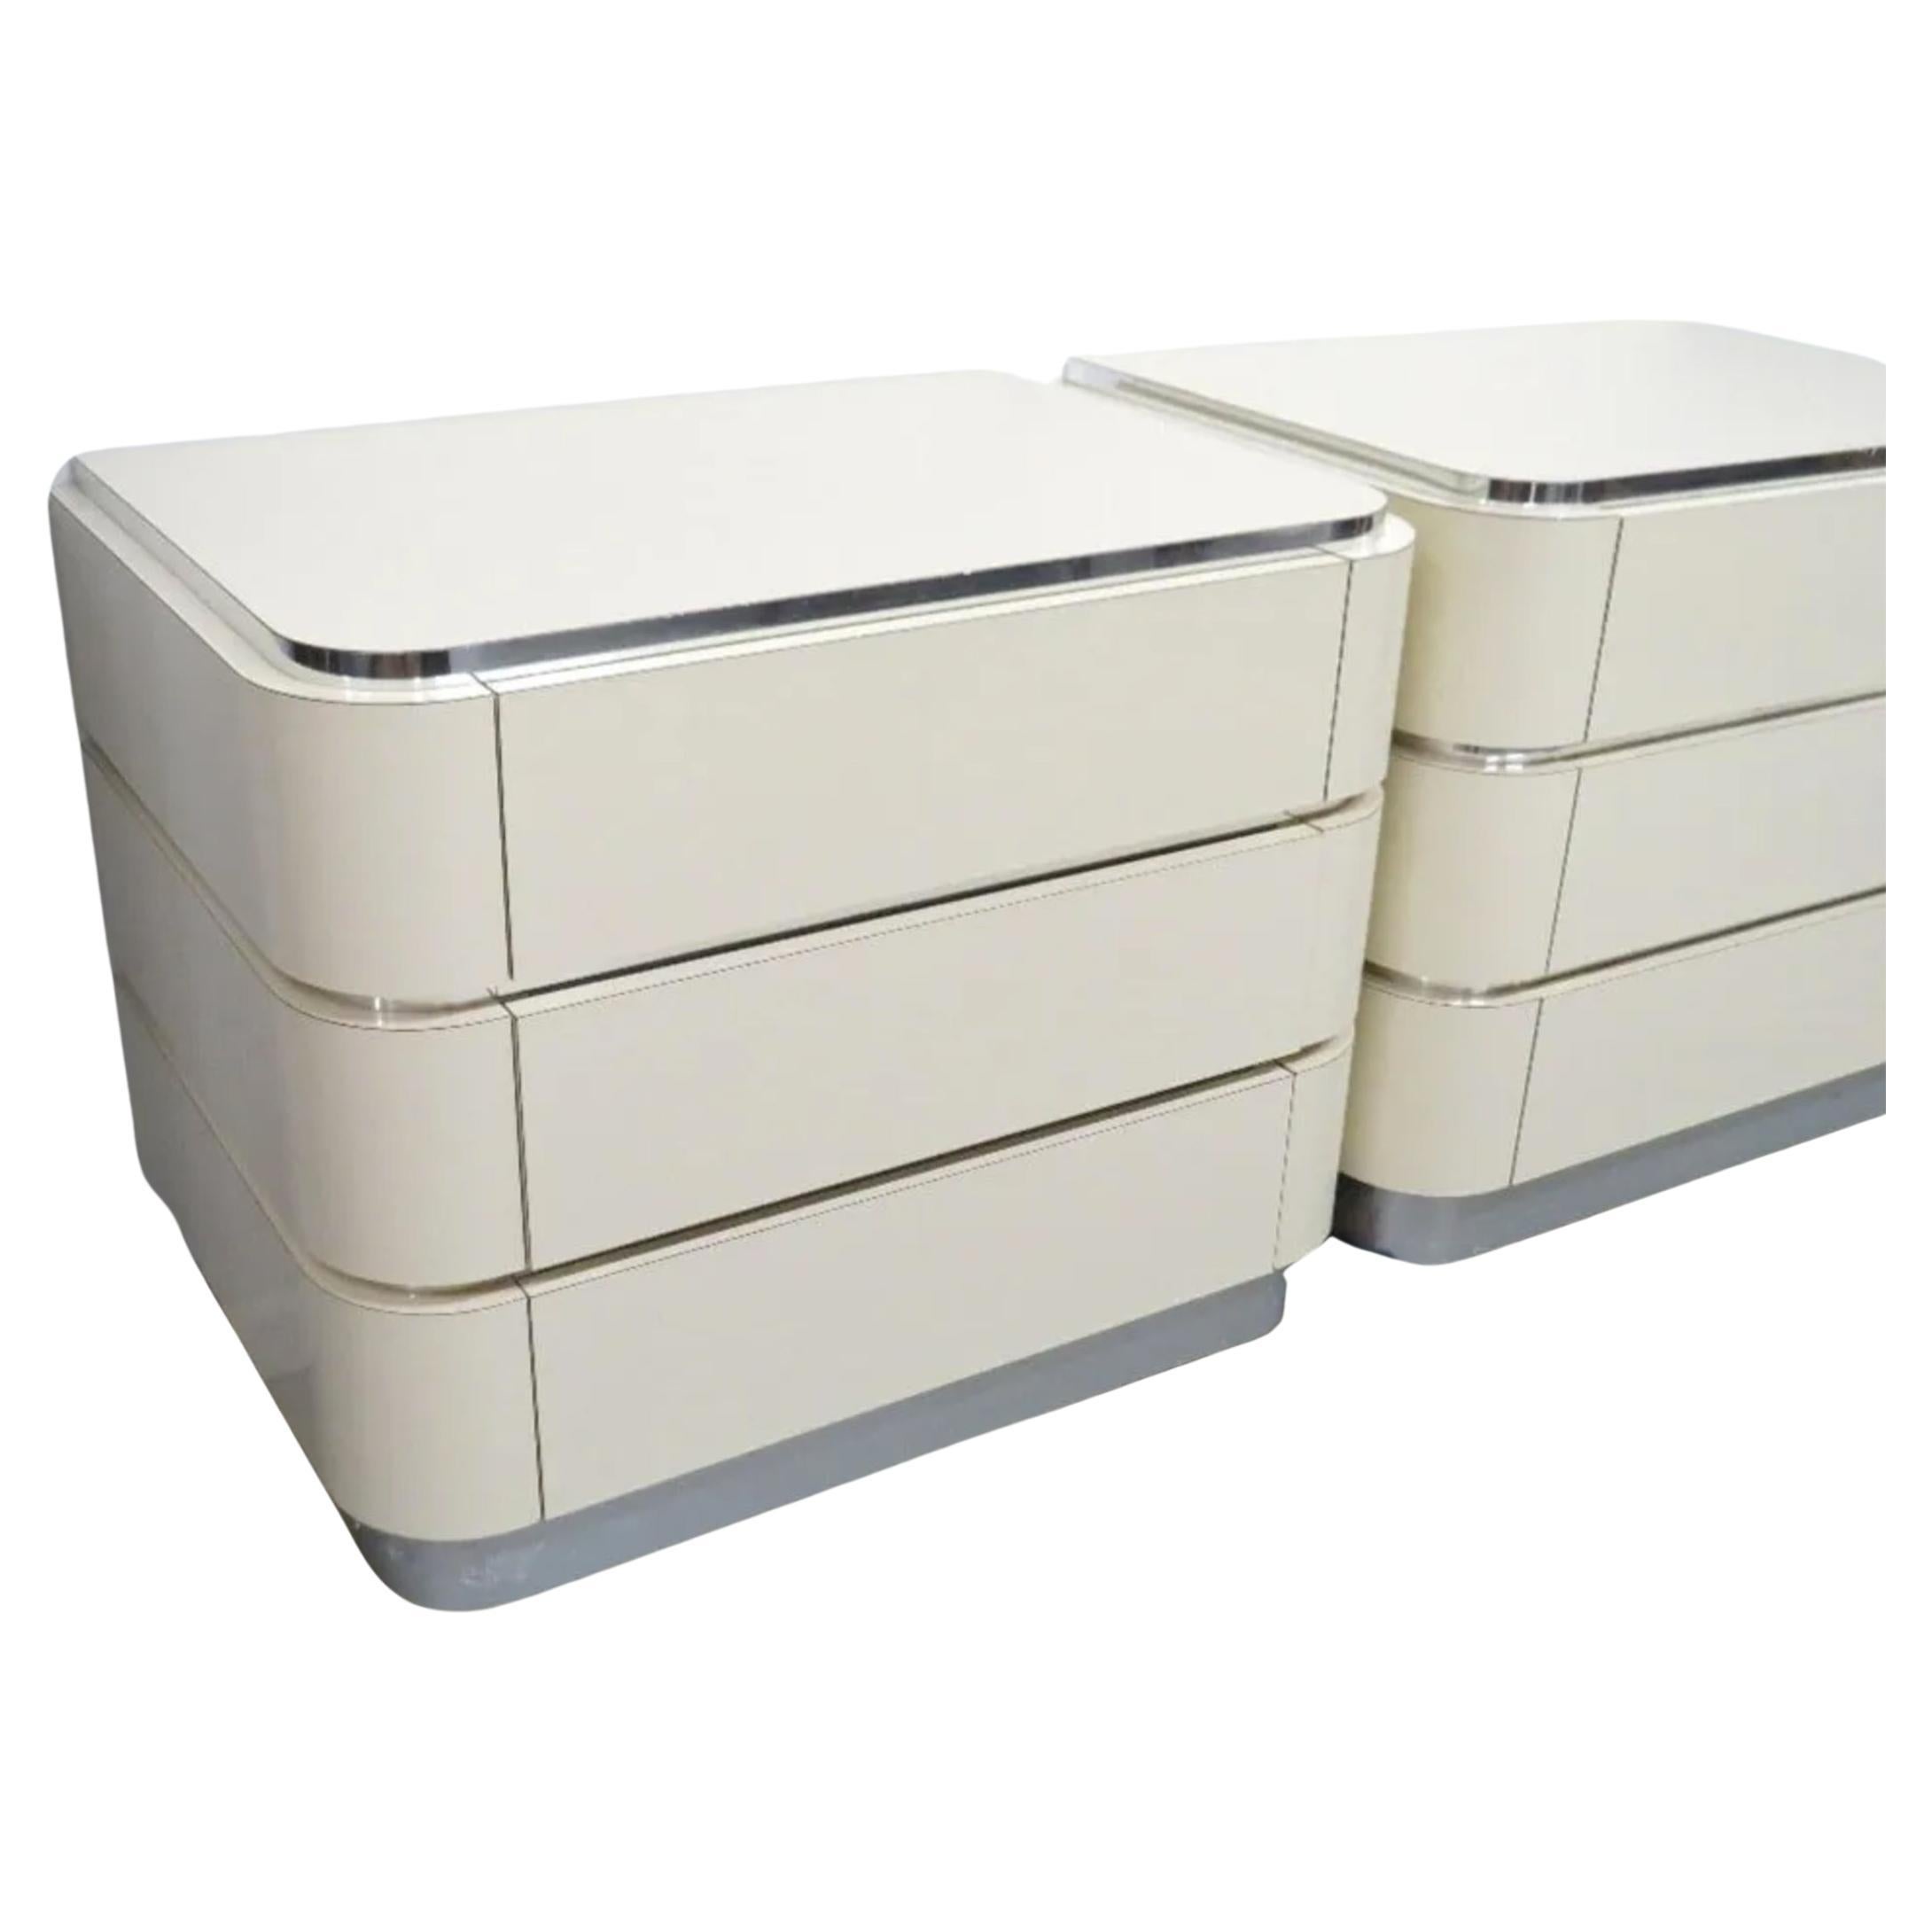 Pair of Mid Century taupe white laminate and chrome Nightstands 3 Drawers. Beautiful condition inside and out. Circa 1970 - 3 Drawer Nightstands all drawers have metal glides all smooth. Shows very little use. Post Modern. Located In Brooklyn